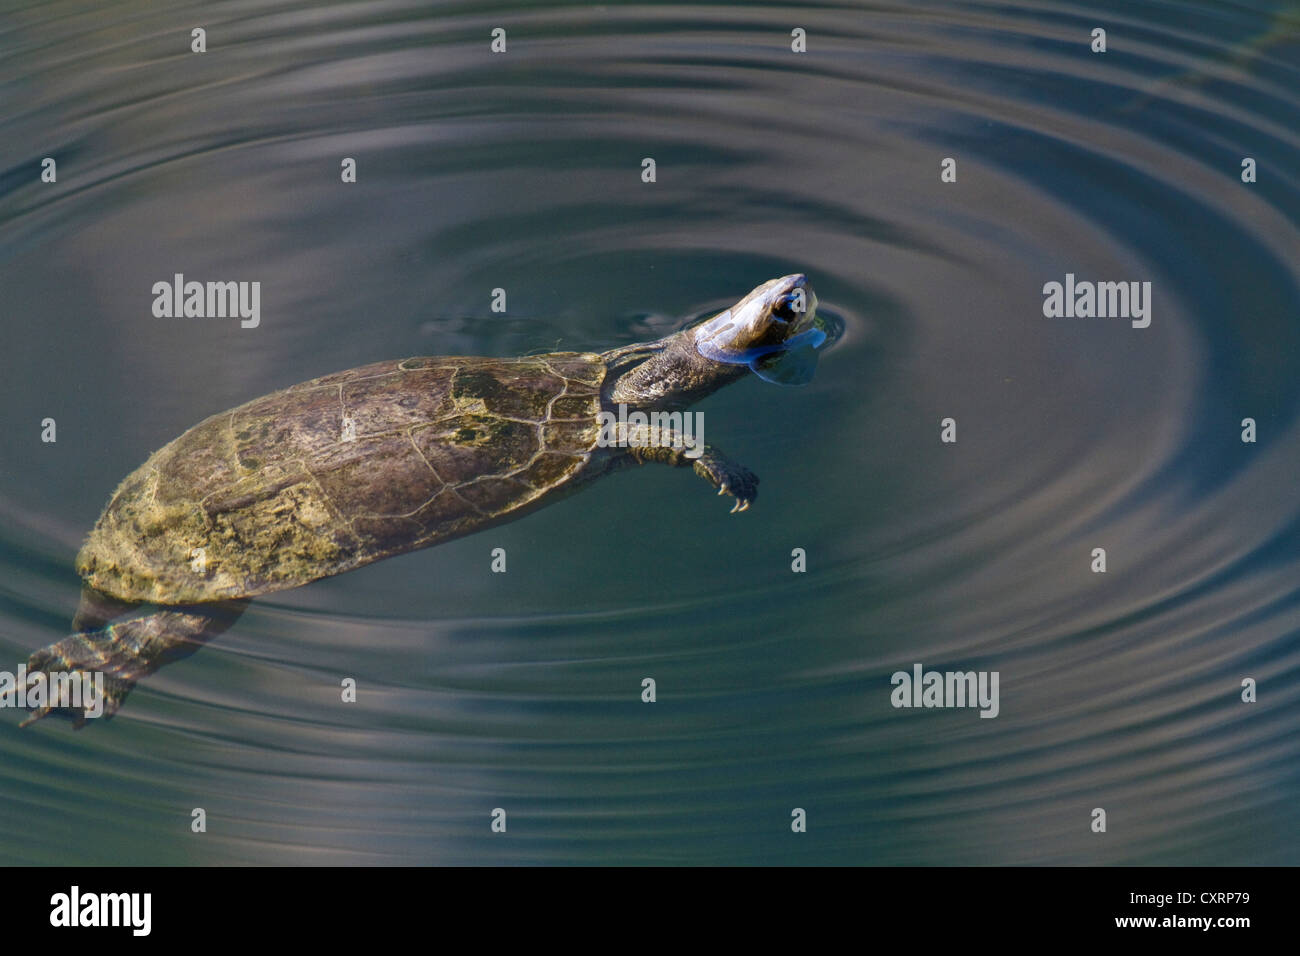 Caspian Turtle (Mauremys caspica), swimming, coming up to catch air, Turkey Stock Photo